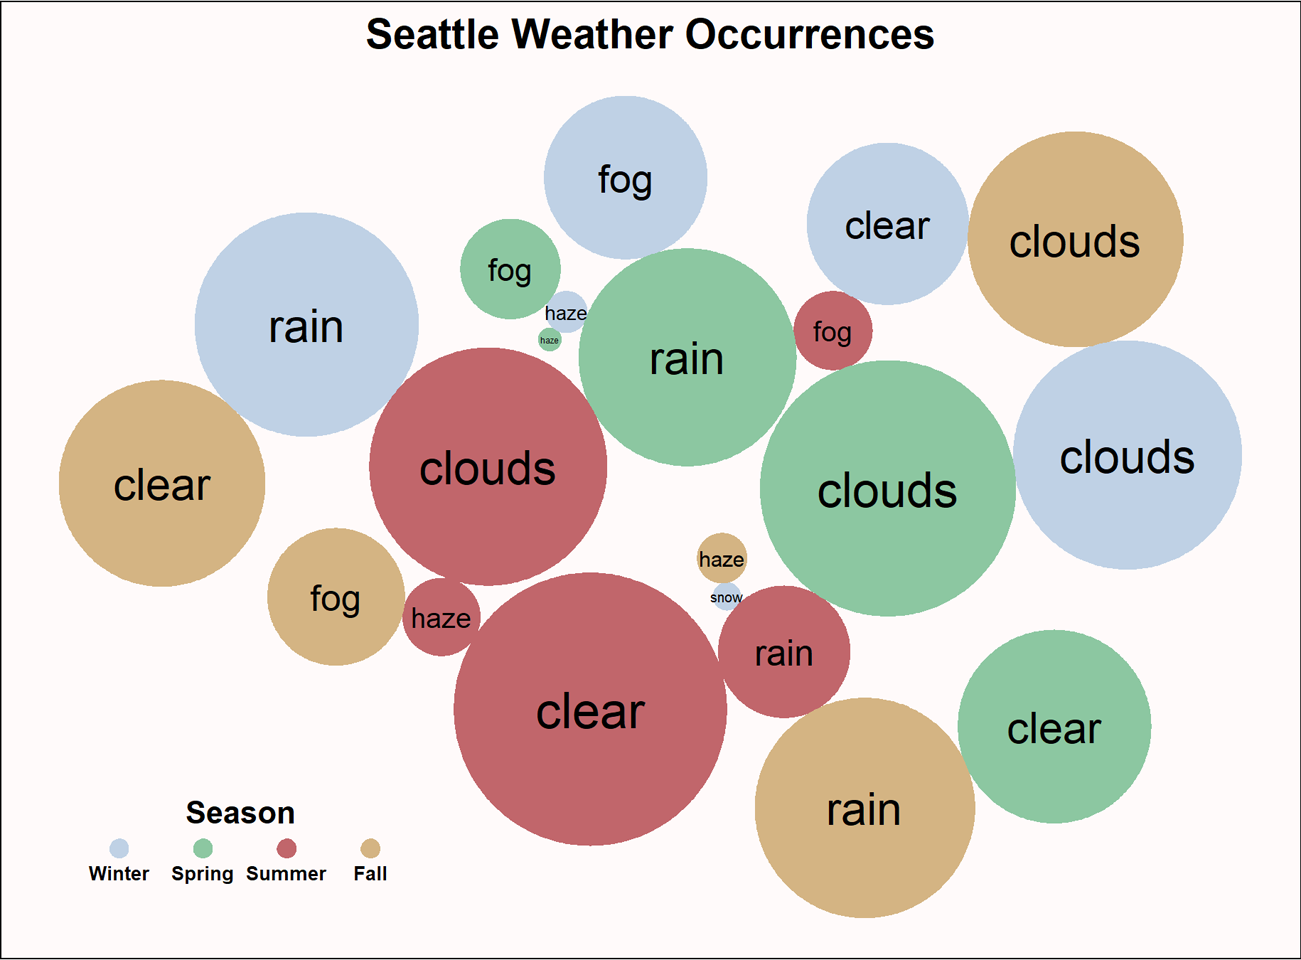 Seattle weather occurences by season